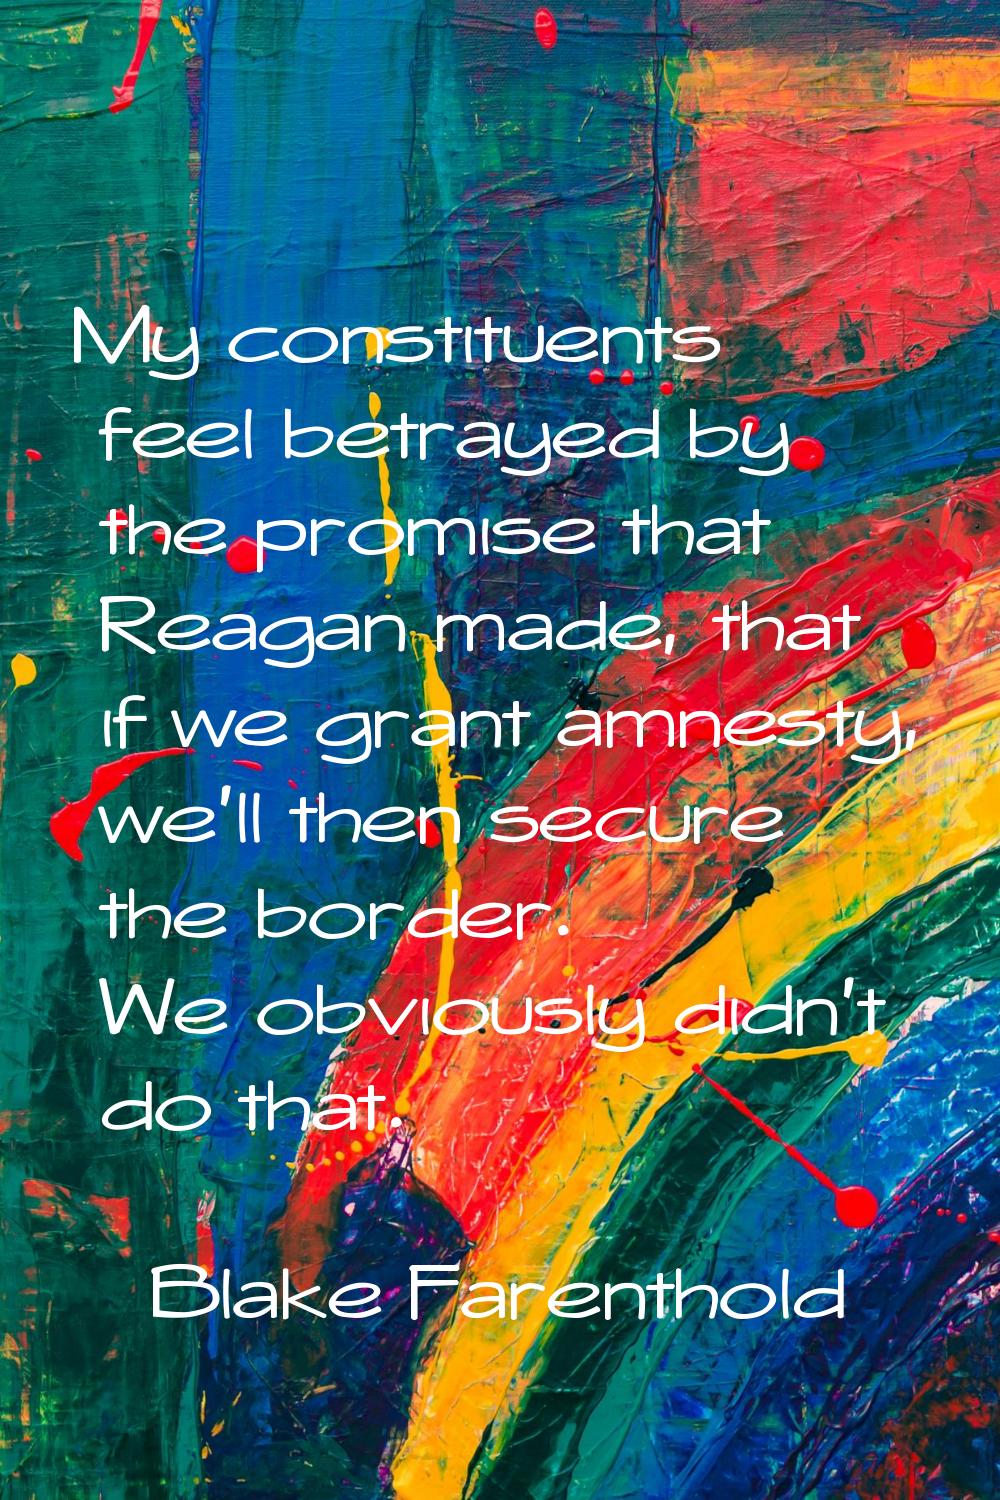 My constituents feel betrayed by the promise that Reagan made, that if we grant amnesty, we'll then